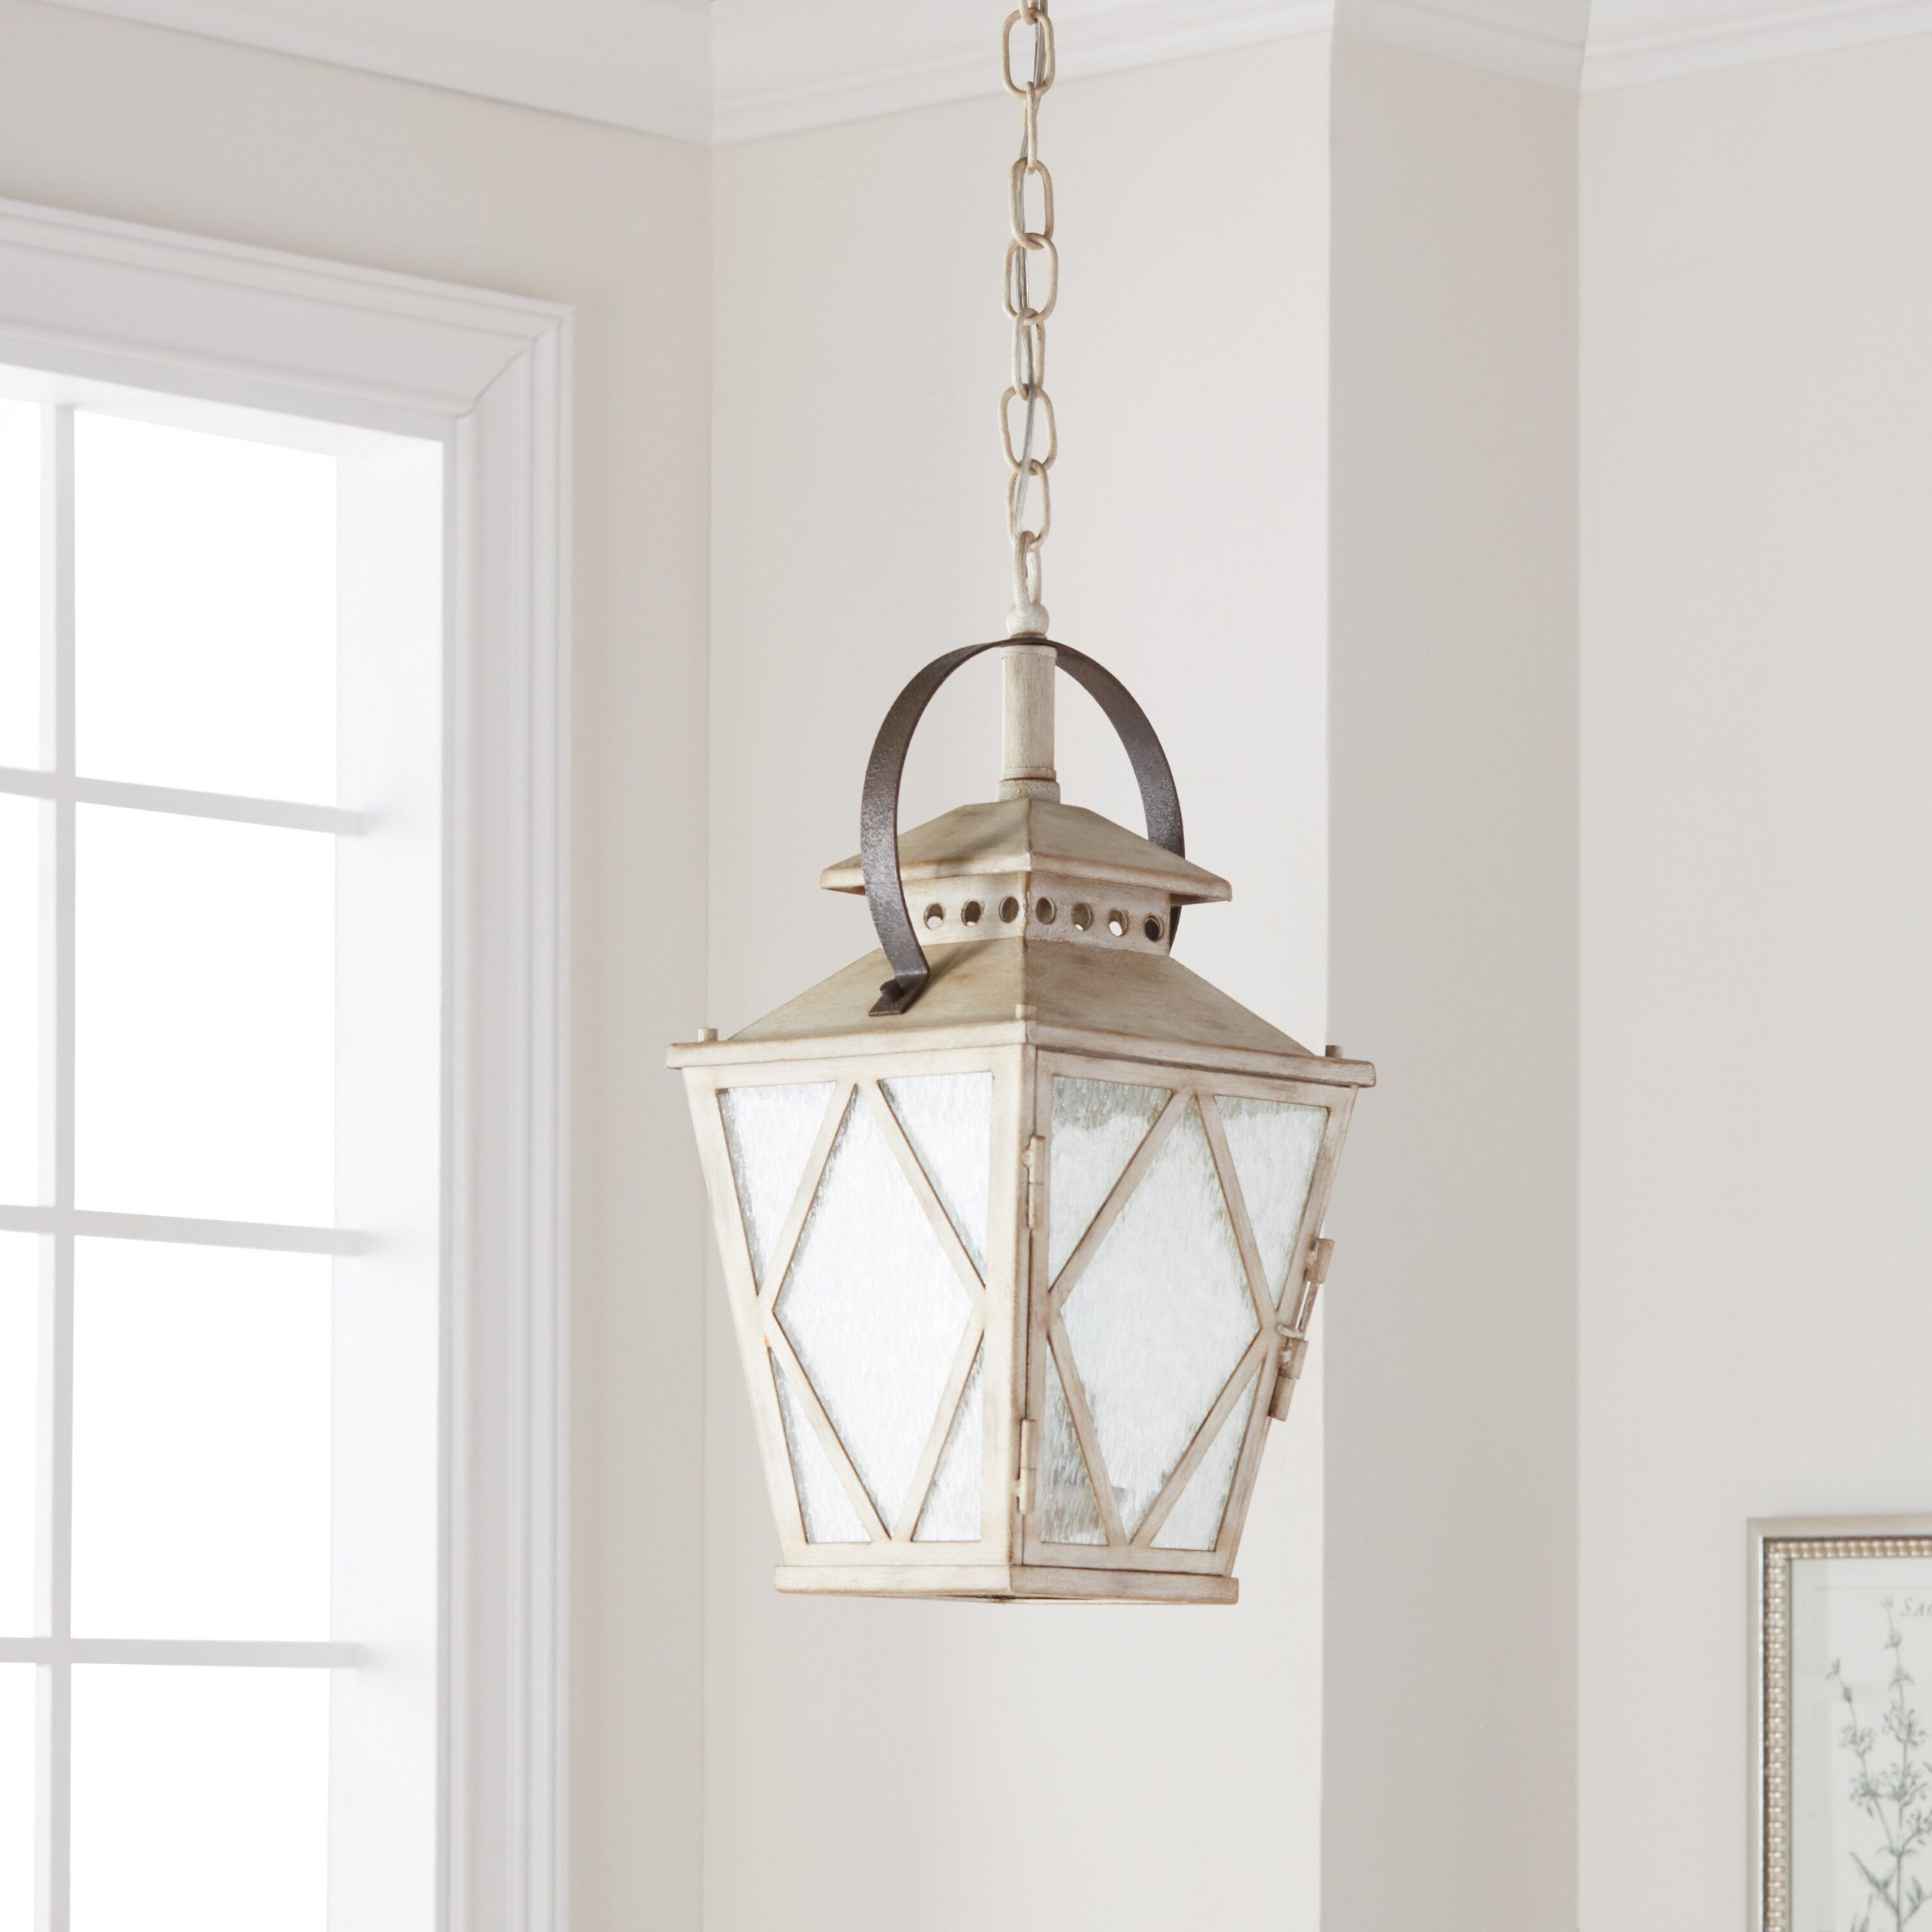 Kichler Lighting Hayman Bay Collection 2 Light Distressed Antique White  Pendant – Overstock – 13454532 Intended For White Distressed Lantern Chandeliers (View 14 of 15)